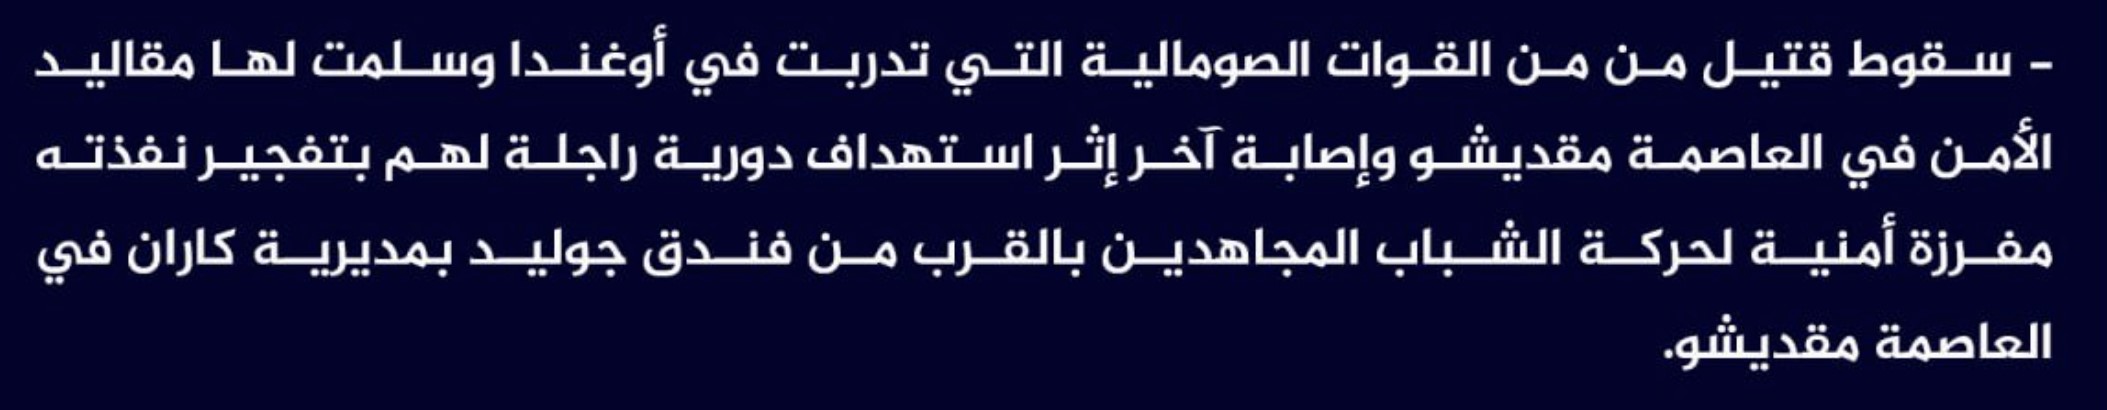 (Claim) al-Shabaab Killed a Somalian Forces Element Who Trained in Uganda and Injured Another in an IED Attack on a Foot Patrol Near Guuleed Hotel, Karan, Mogadishu, Somalia - 2 August 2023